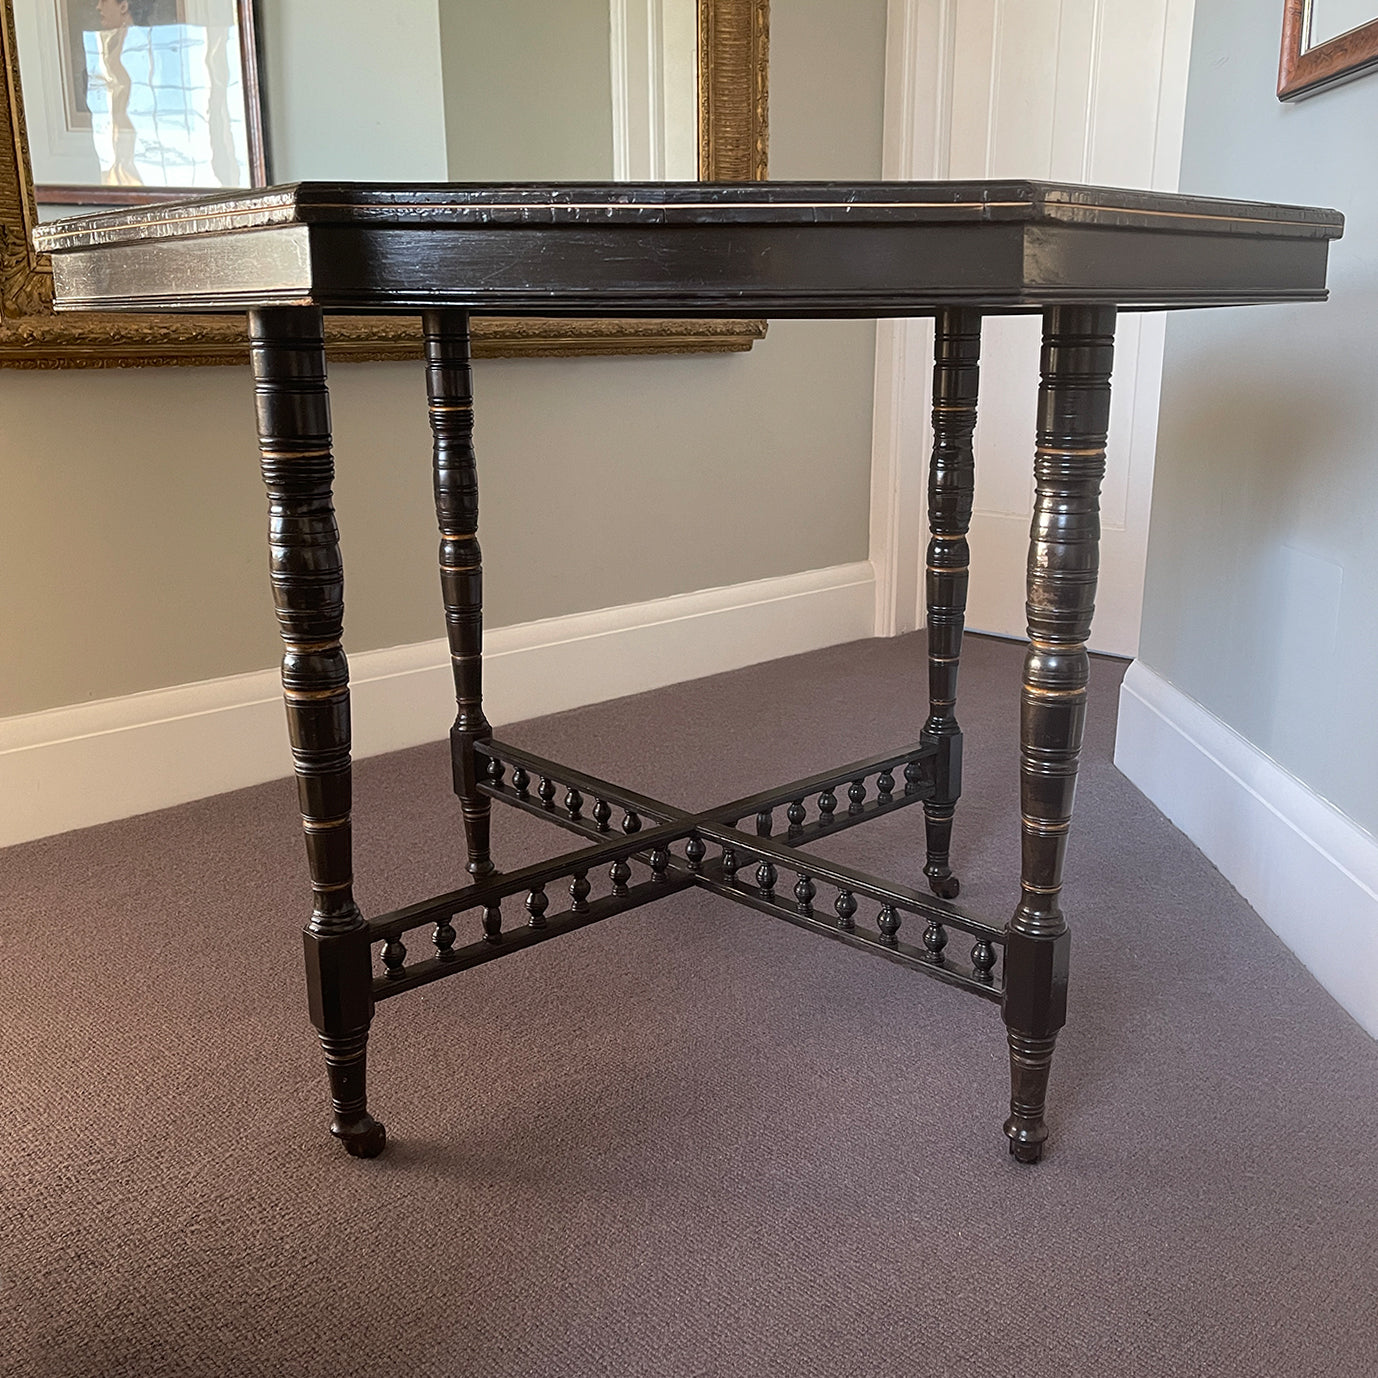 A Victorian marquetry & ebonised octagonal centre table in the Aesthetic manner by Alexander Mackenzie & Co, Glasgow.The top sees a rich burr wood veneer edged with fine blond wood marquetry, whilst underneath sees four turned ebonised legs with gold painted detailing and crossed bobbin stretchers - SHOP NOW - www.intovintage.co.uk